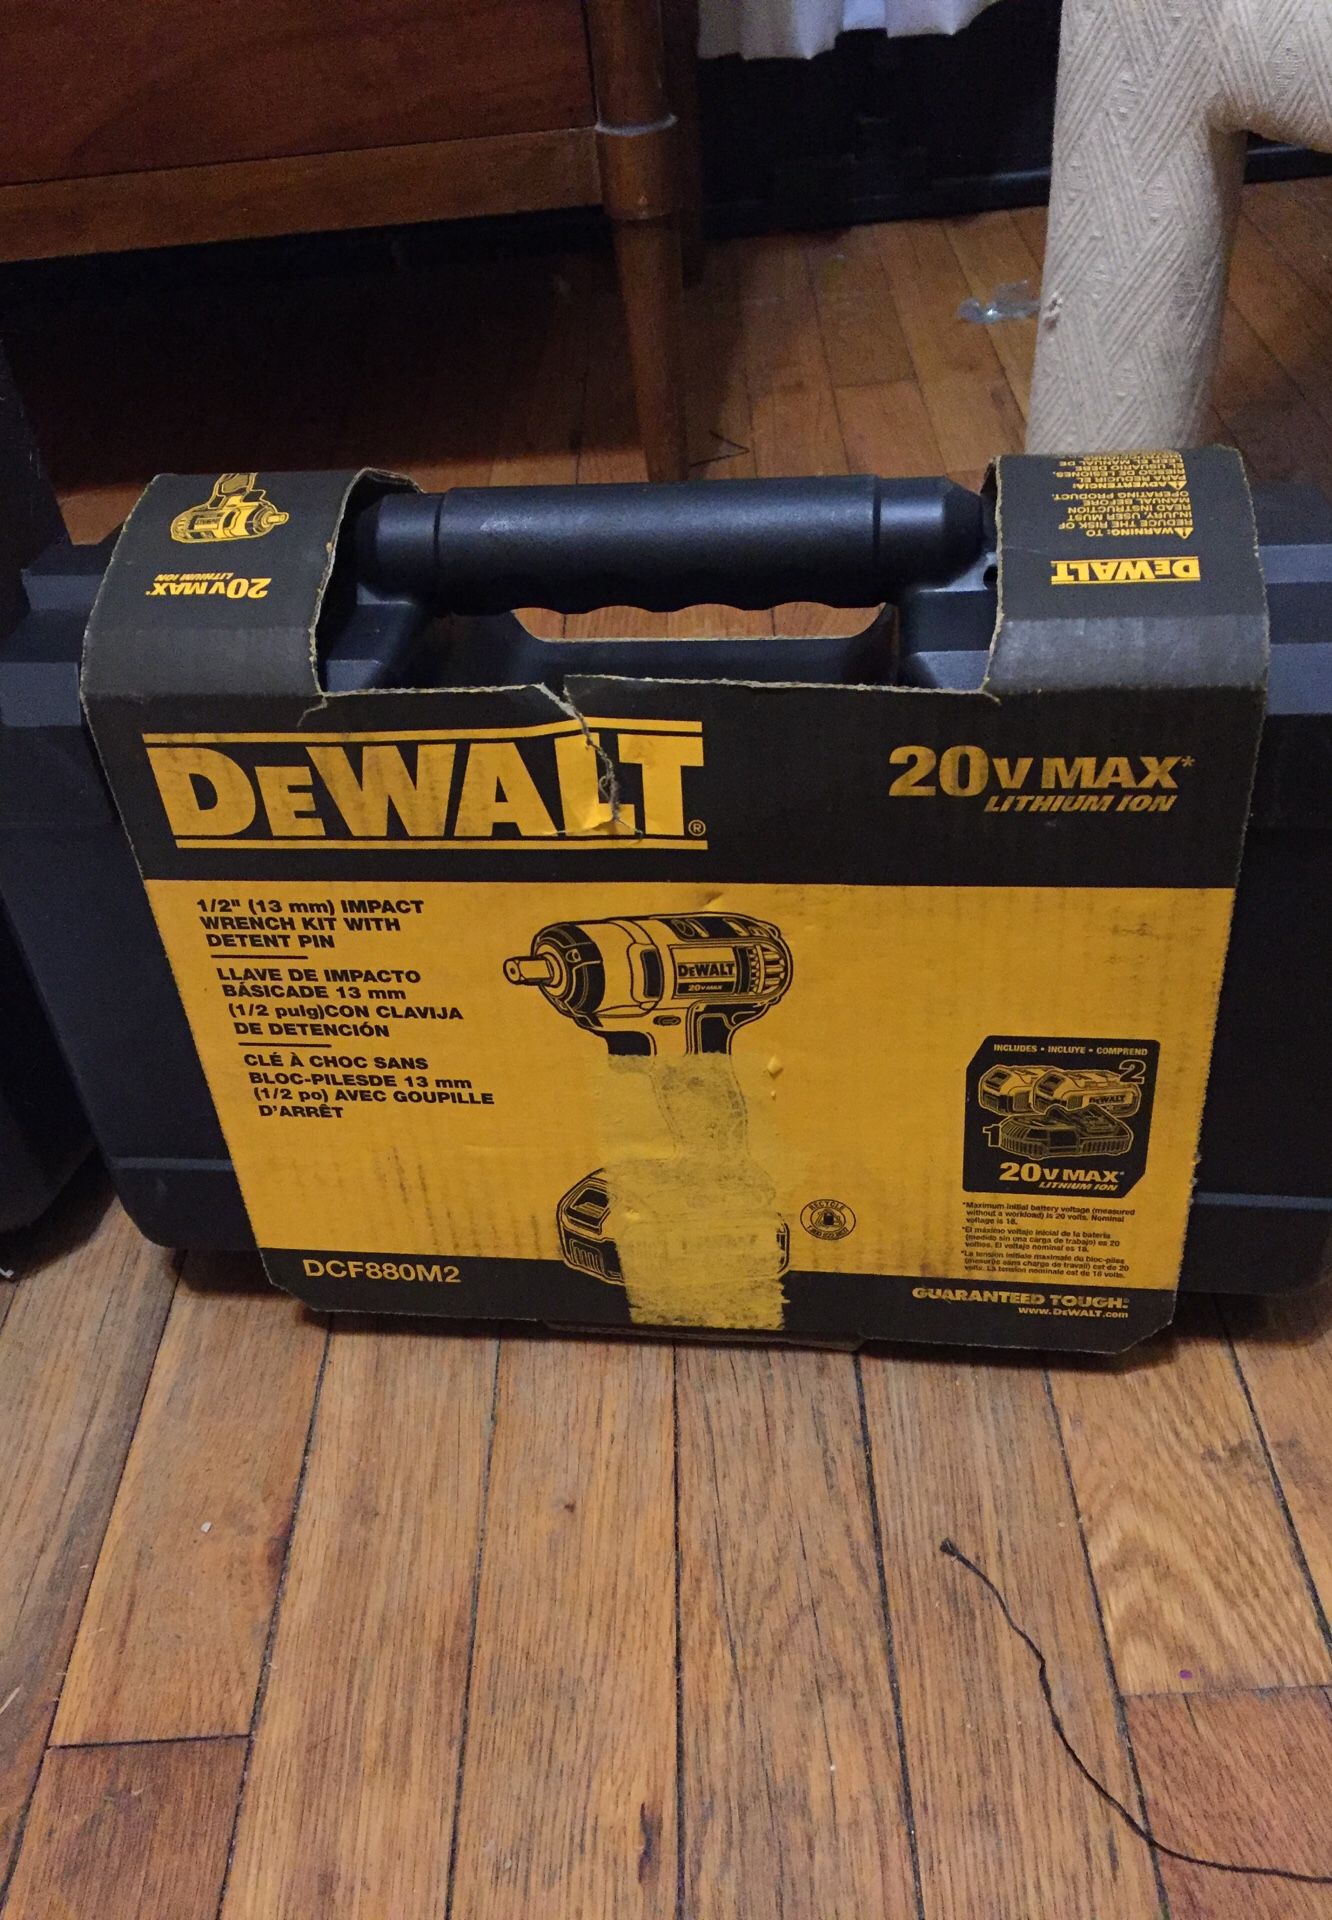 DeWalt 1/2 inch impact wrench kit with detent pin new in box